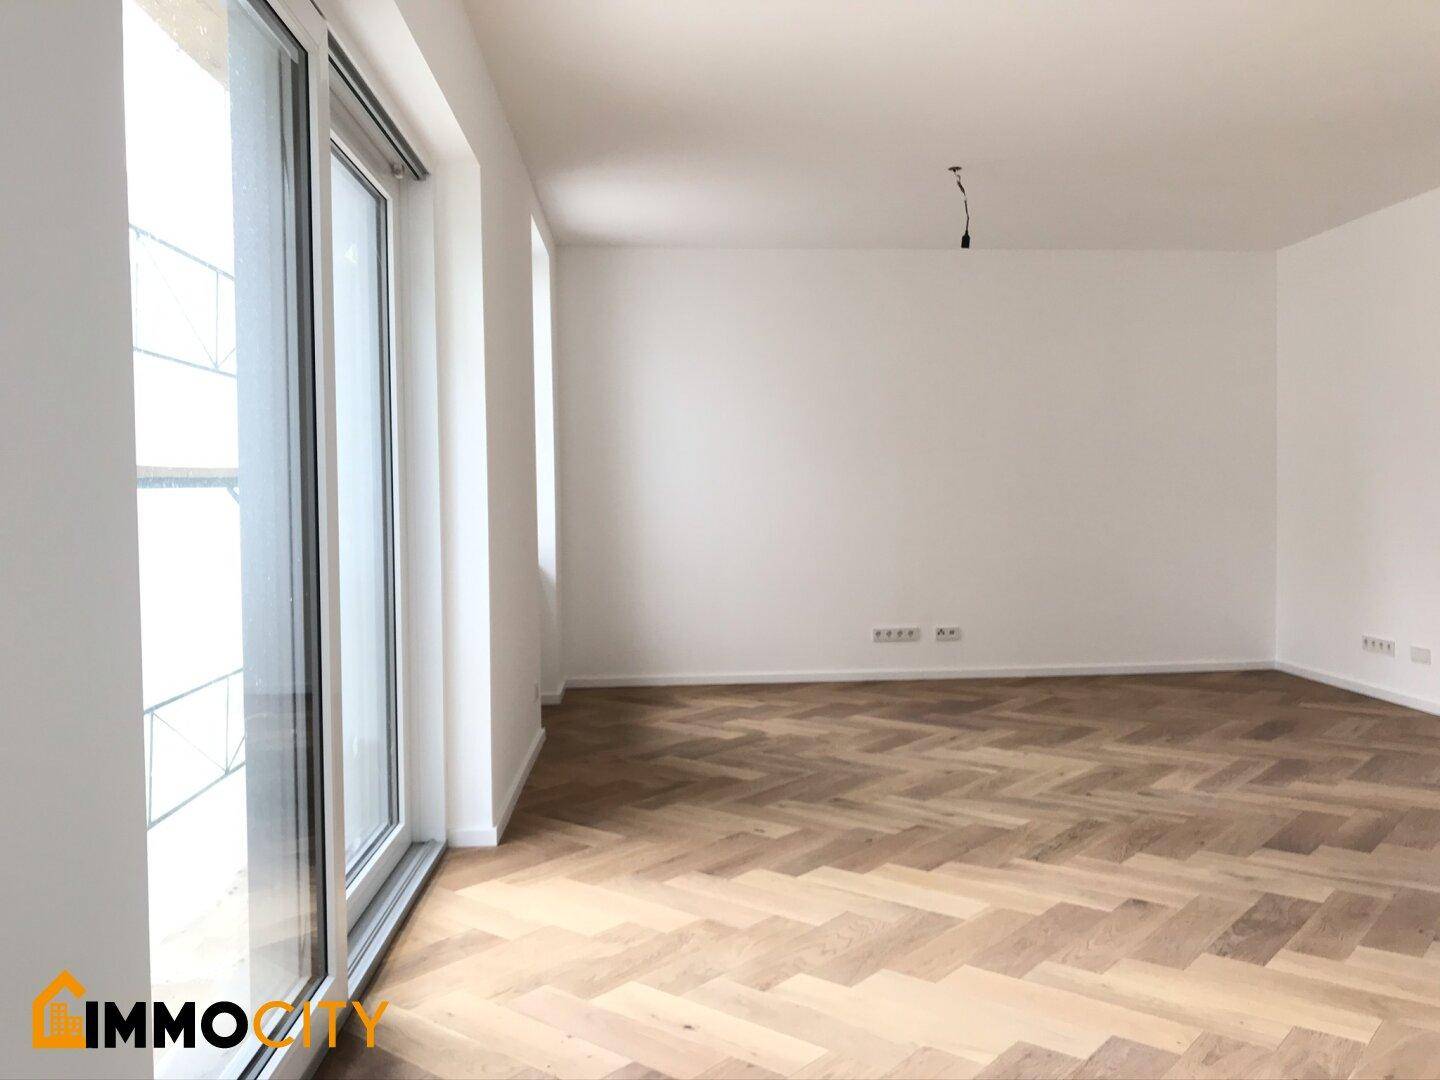 https://pictures.immobilienscout24.de/prod.www.immobilienscout24.at/pictureserver/loadPicture?q=70&id=012.0015I000003IBfb-1602800158-70bf880bf4a046bcade415fa1492ec88